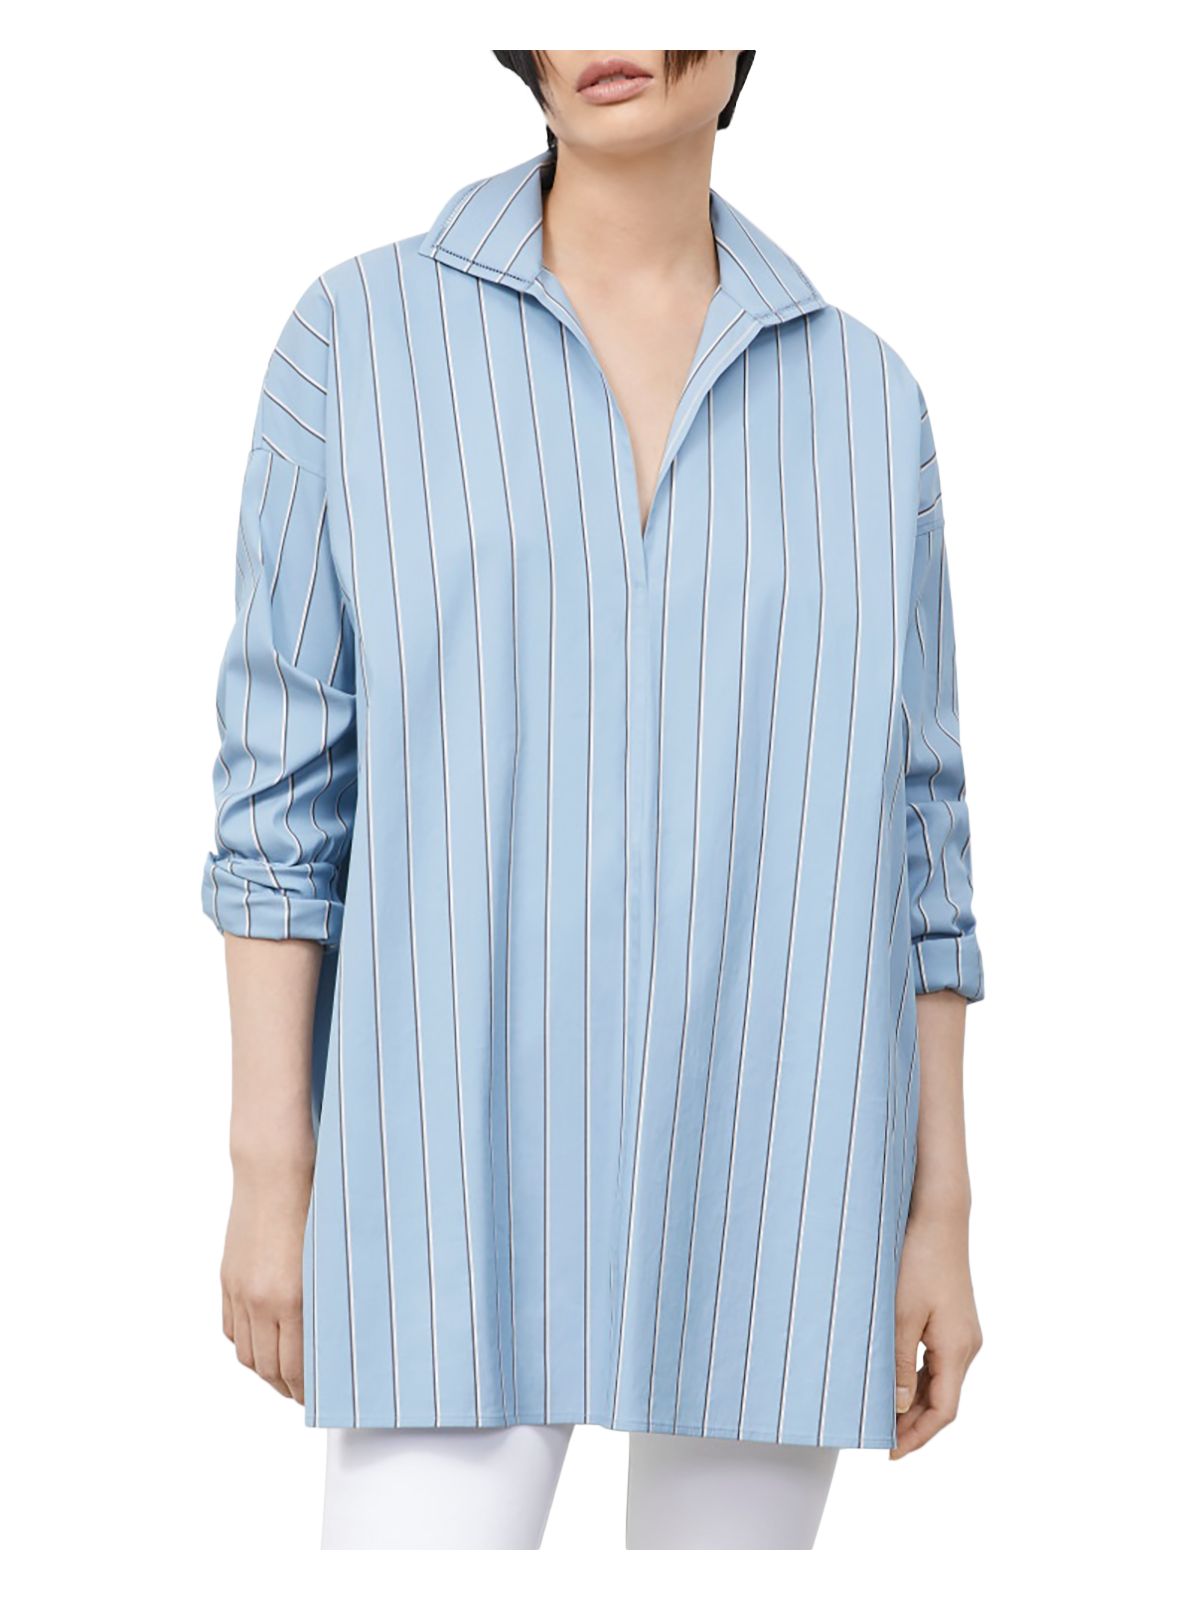 LAFAYETTE 148 Womens Blue Striped Long Sleeve Collared Tunic Top XL